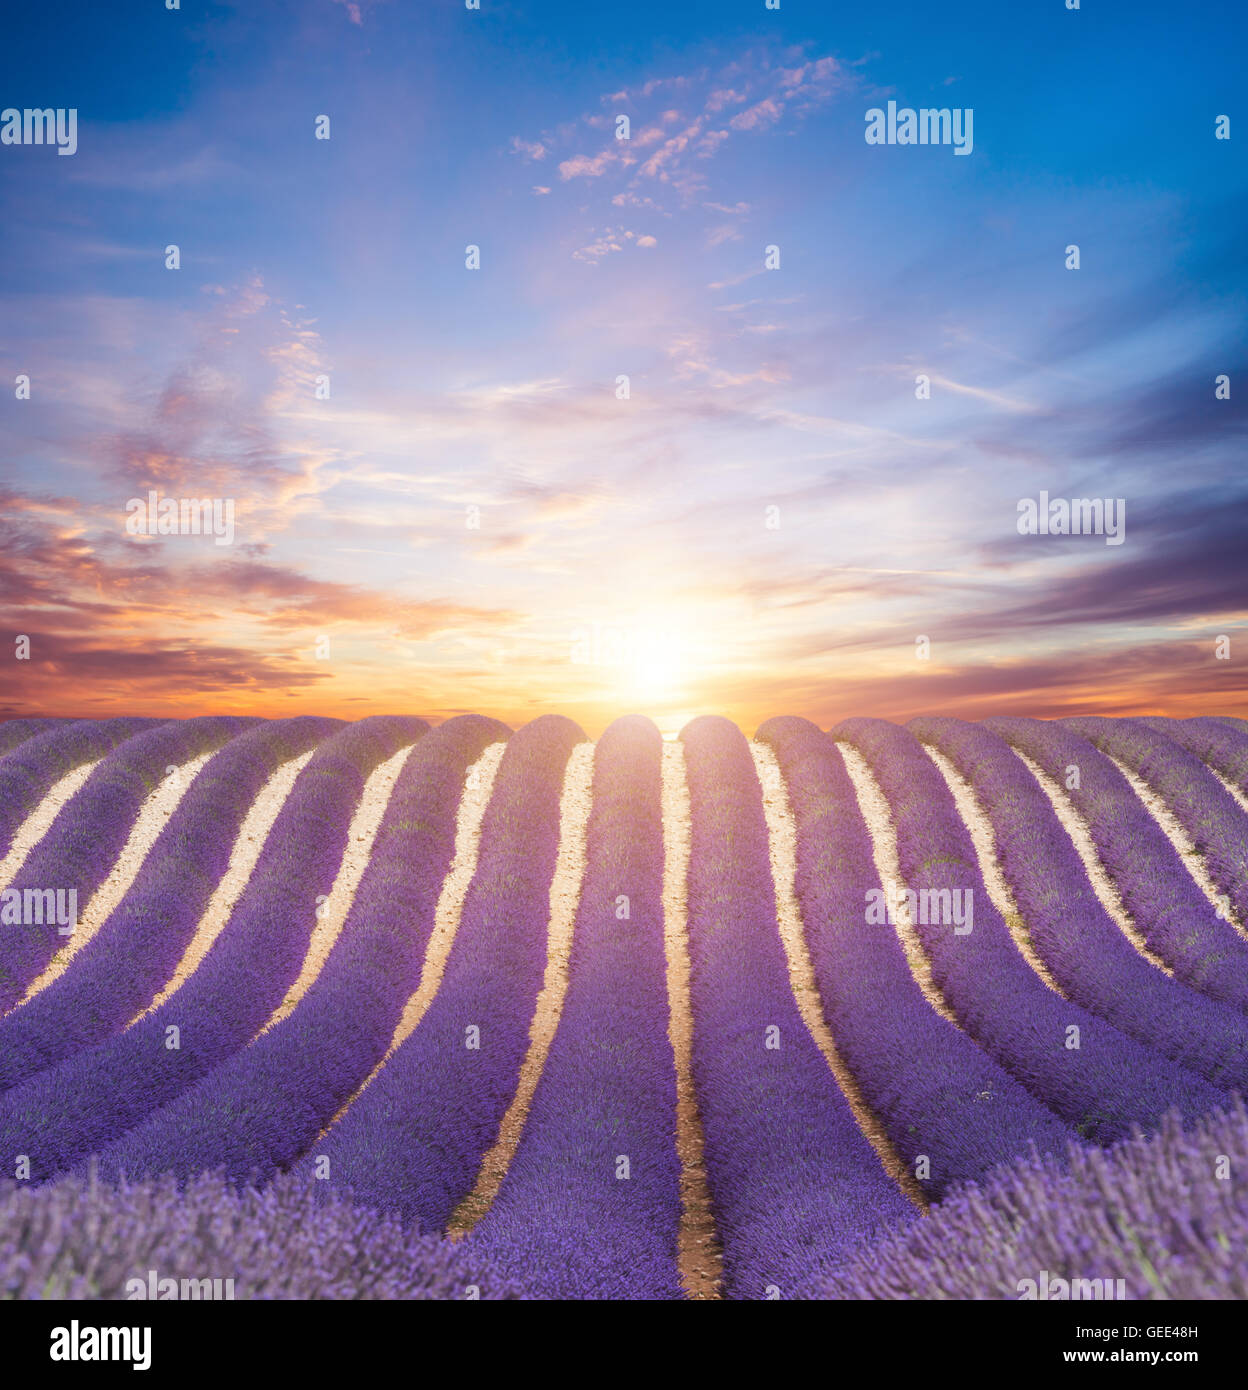 Beautiful landscape of blooming lavender field in sunset. Provence, France, Europe. Stock Photo